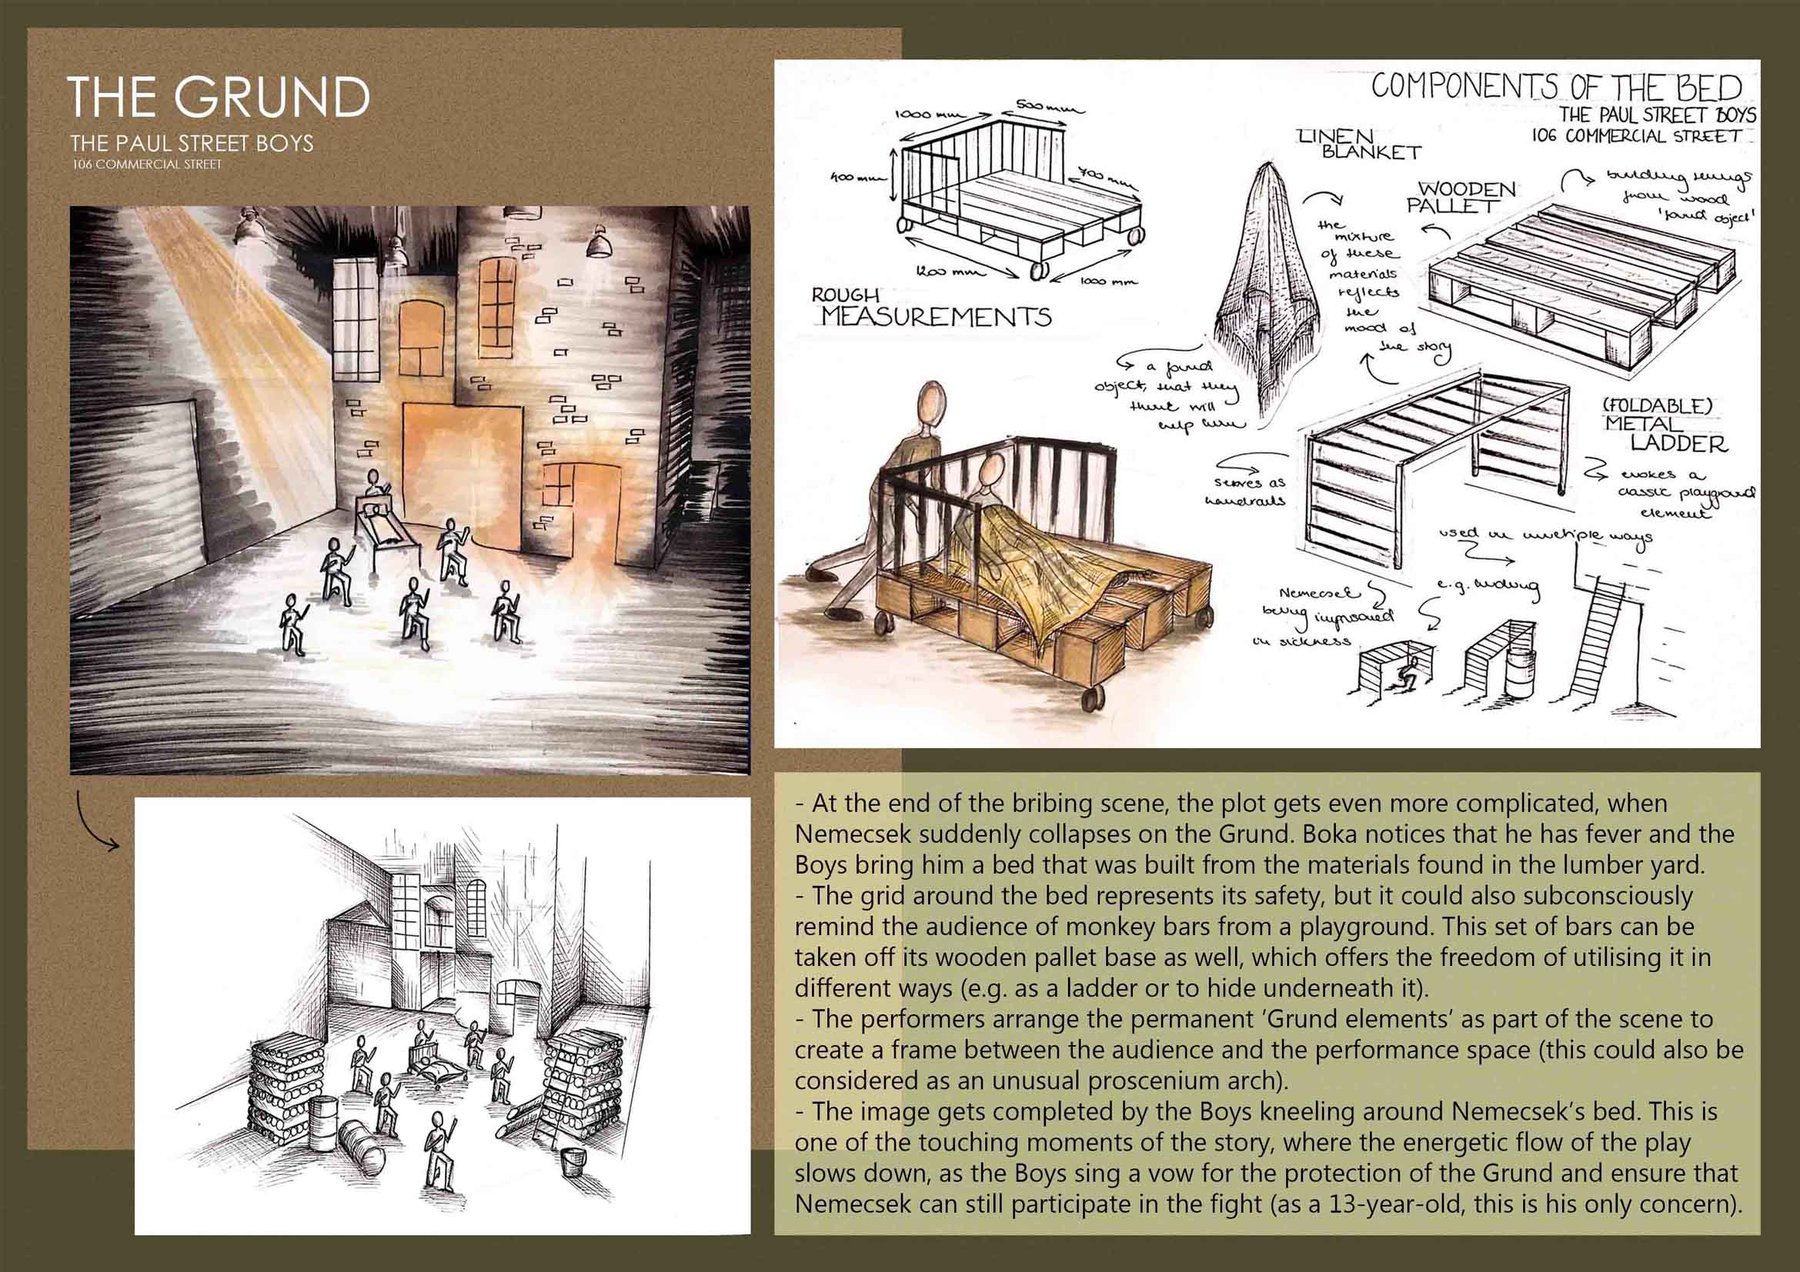 Prop design and set elements for the playground ('Grund') scene in The Paul Street Boys